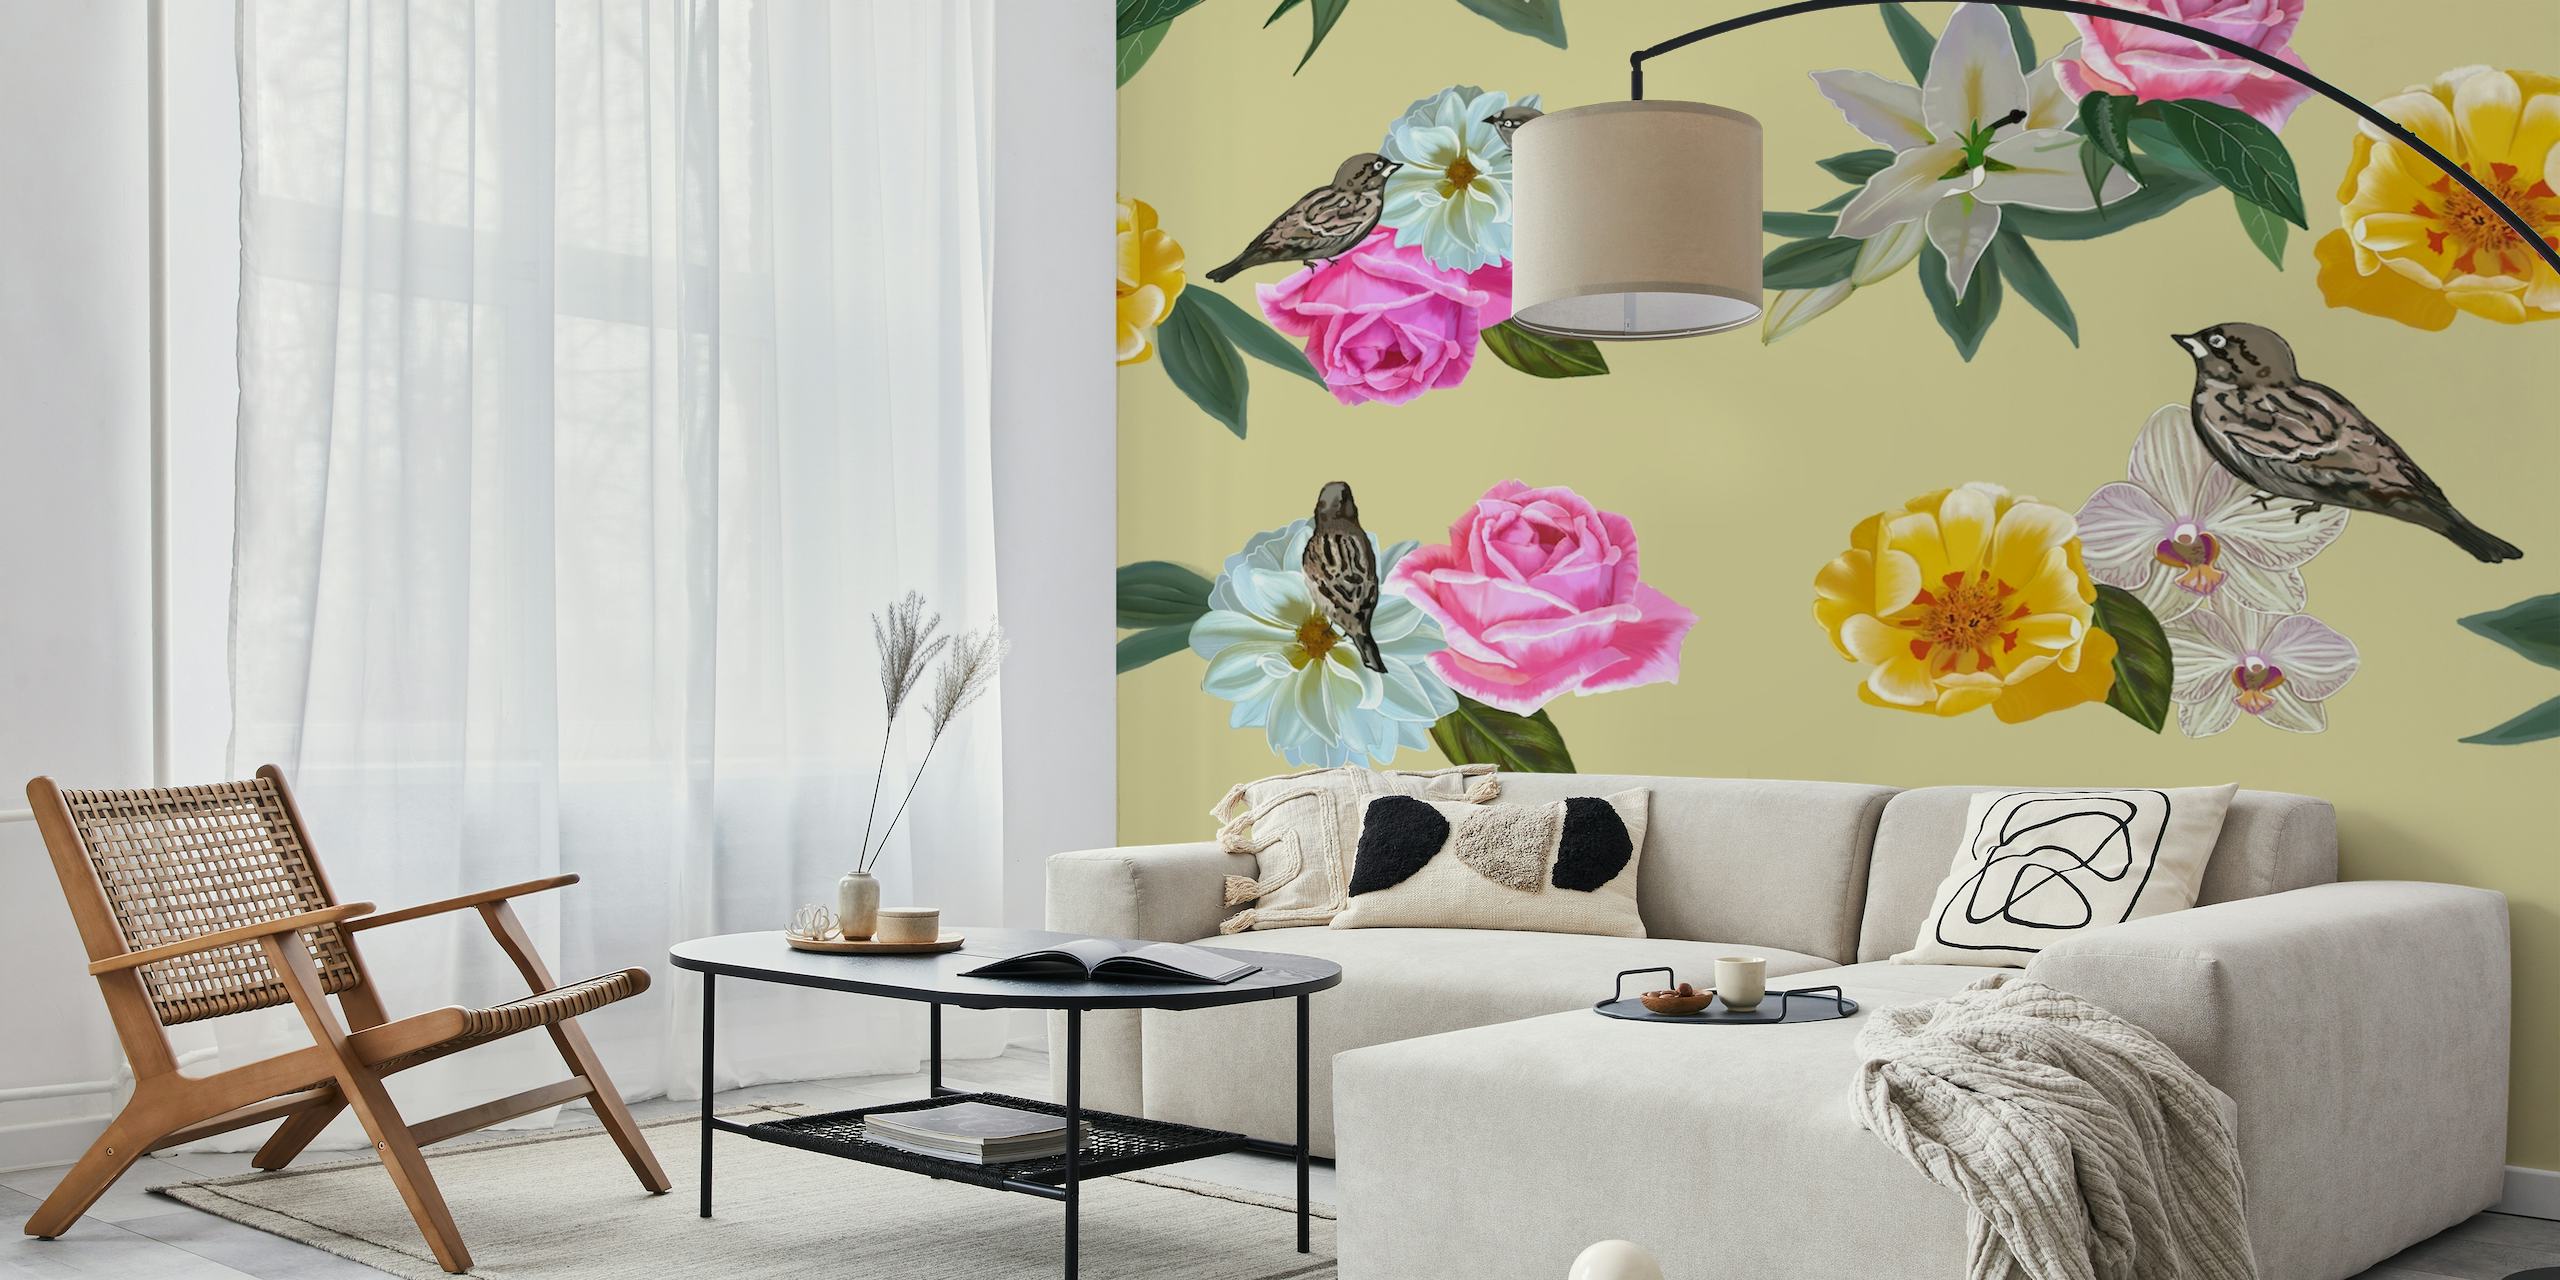 Floral wall mural with roses and birds on a yellow background